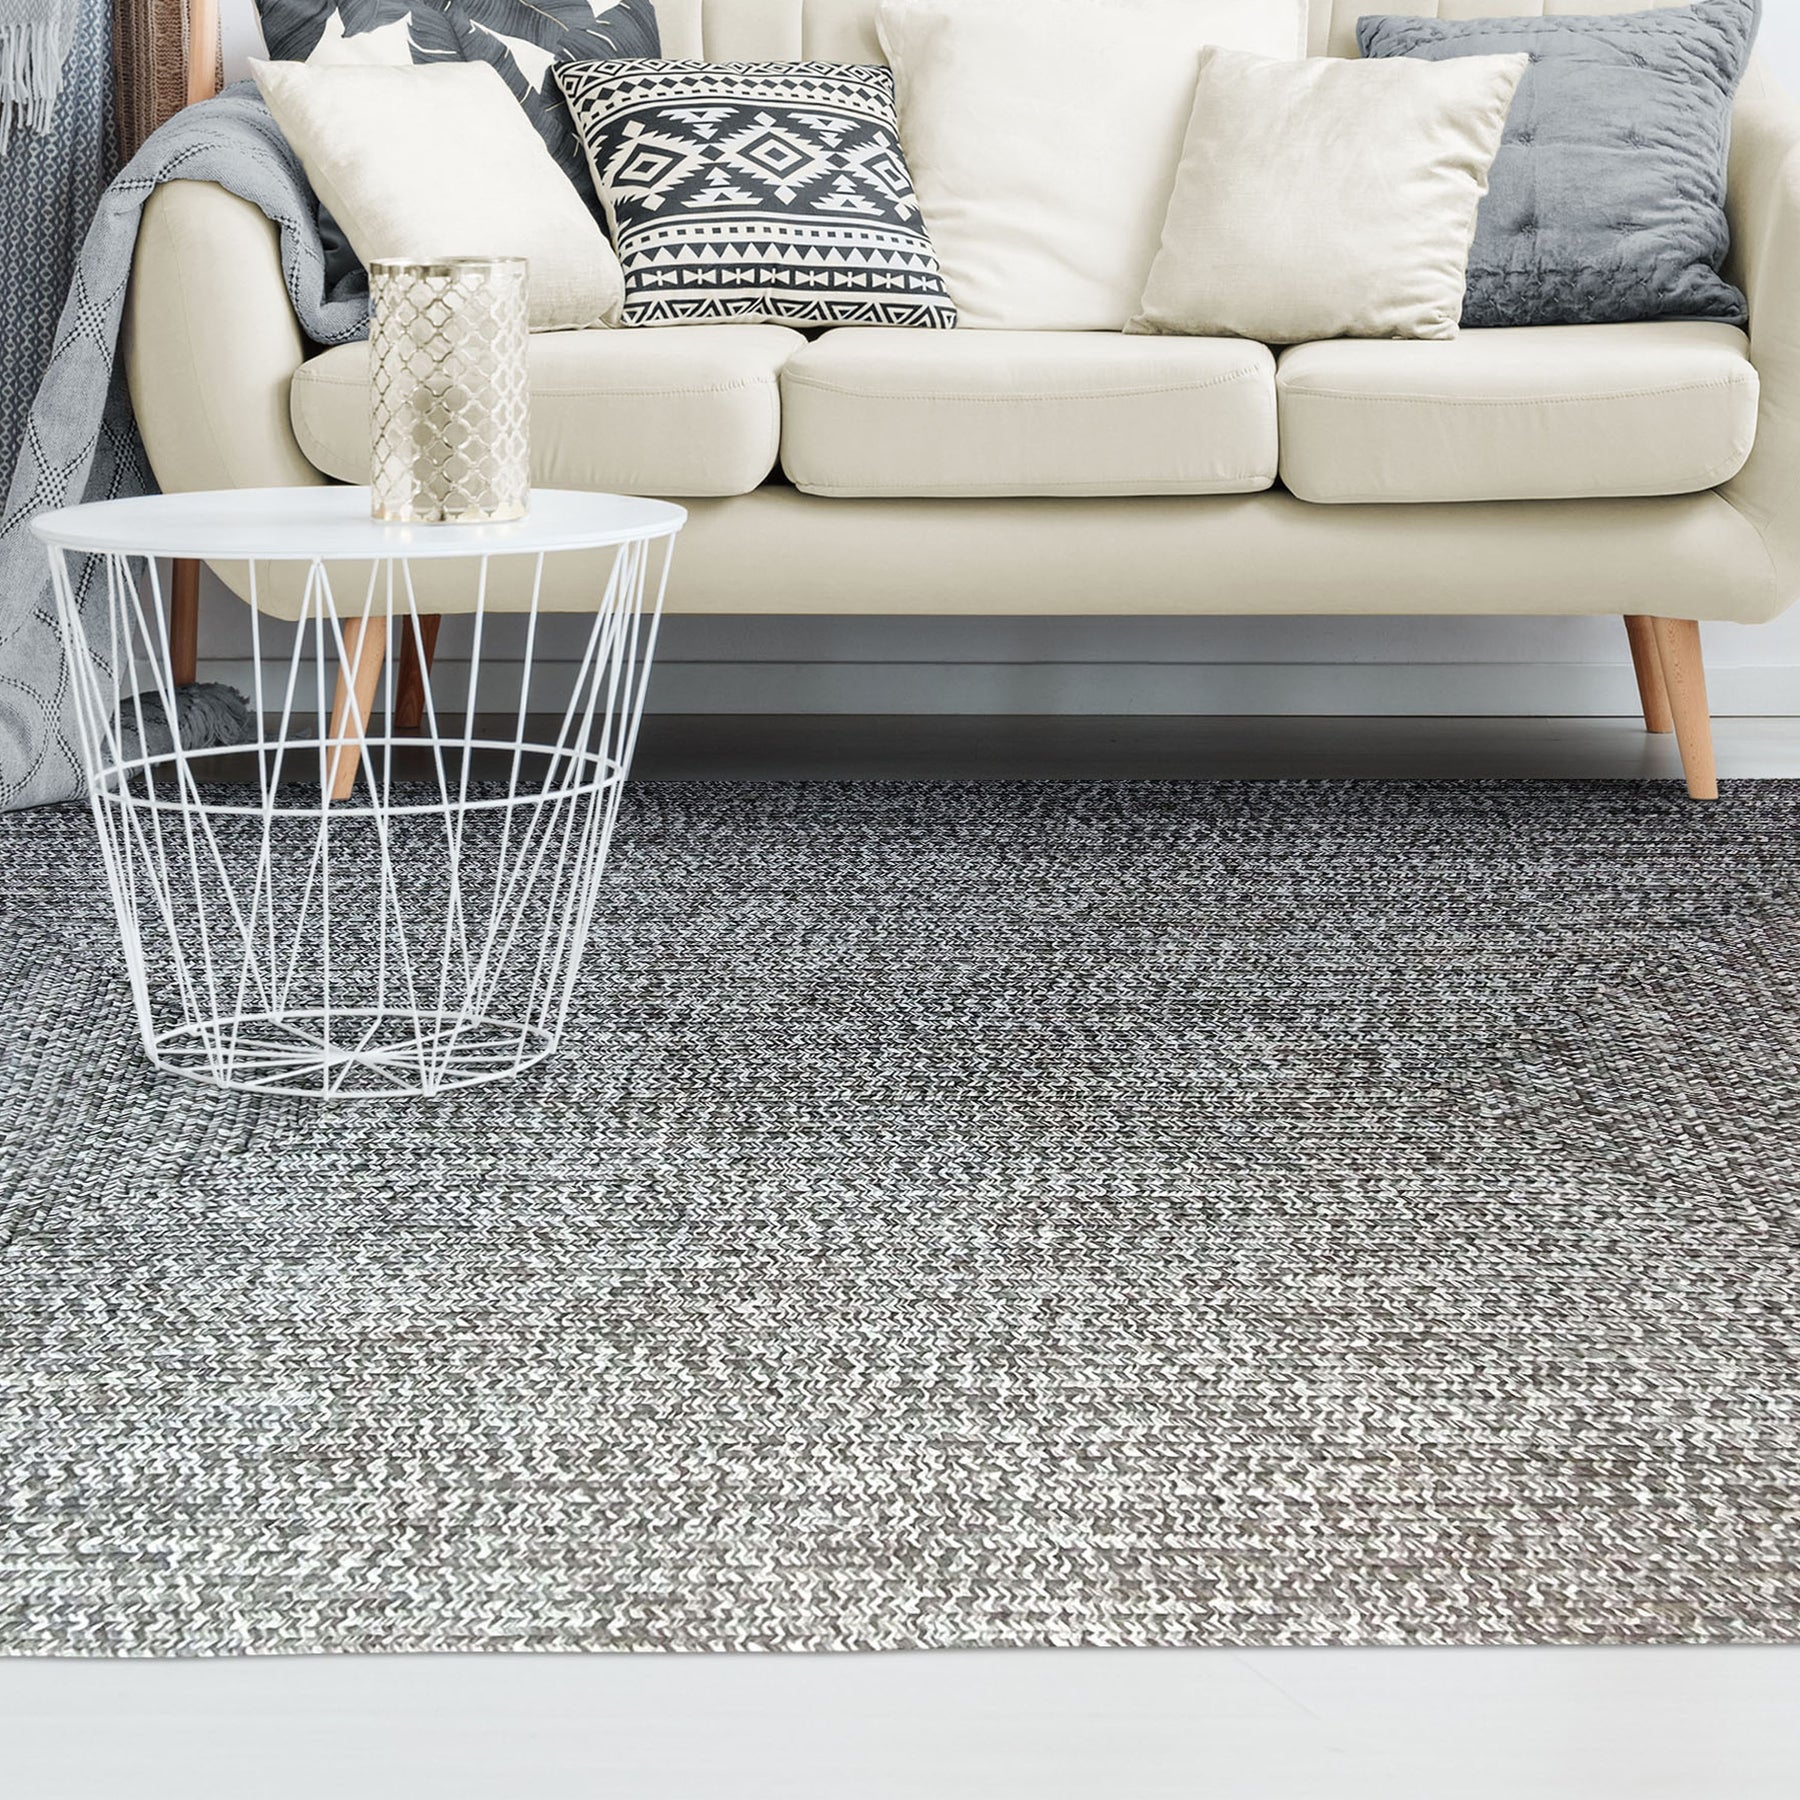 Superior Bohemian Multi-Toned Braided Patterned Indoor Outdoor Area Rug - Slate-White